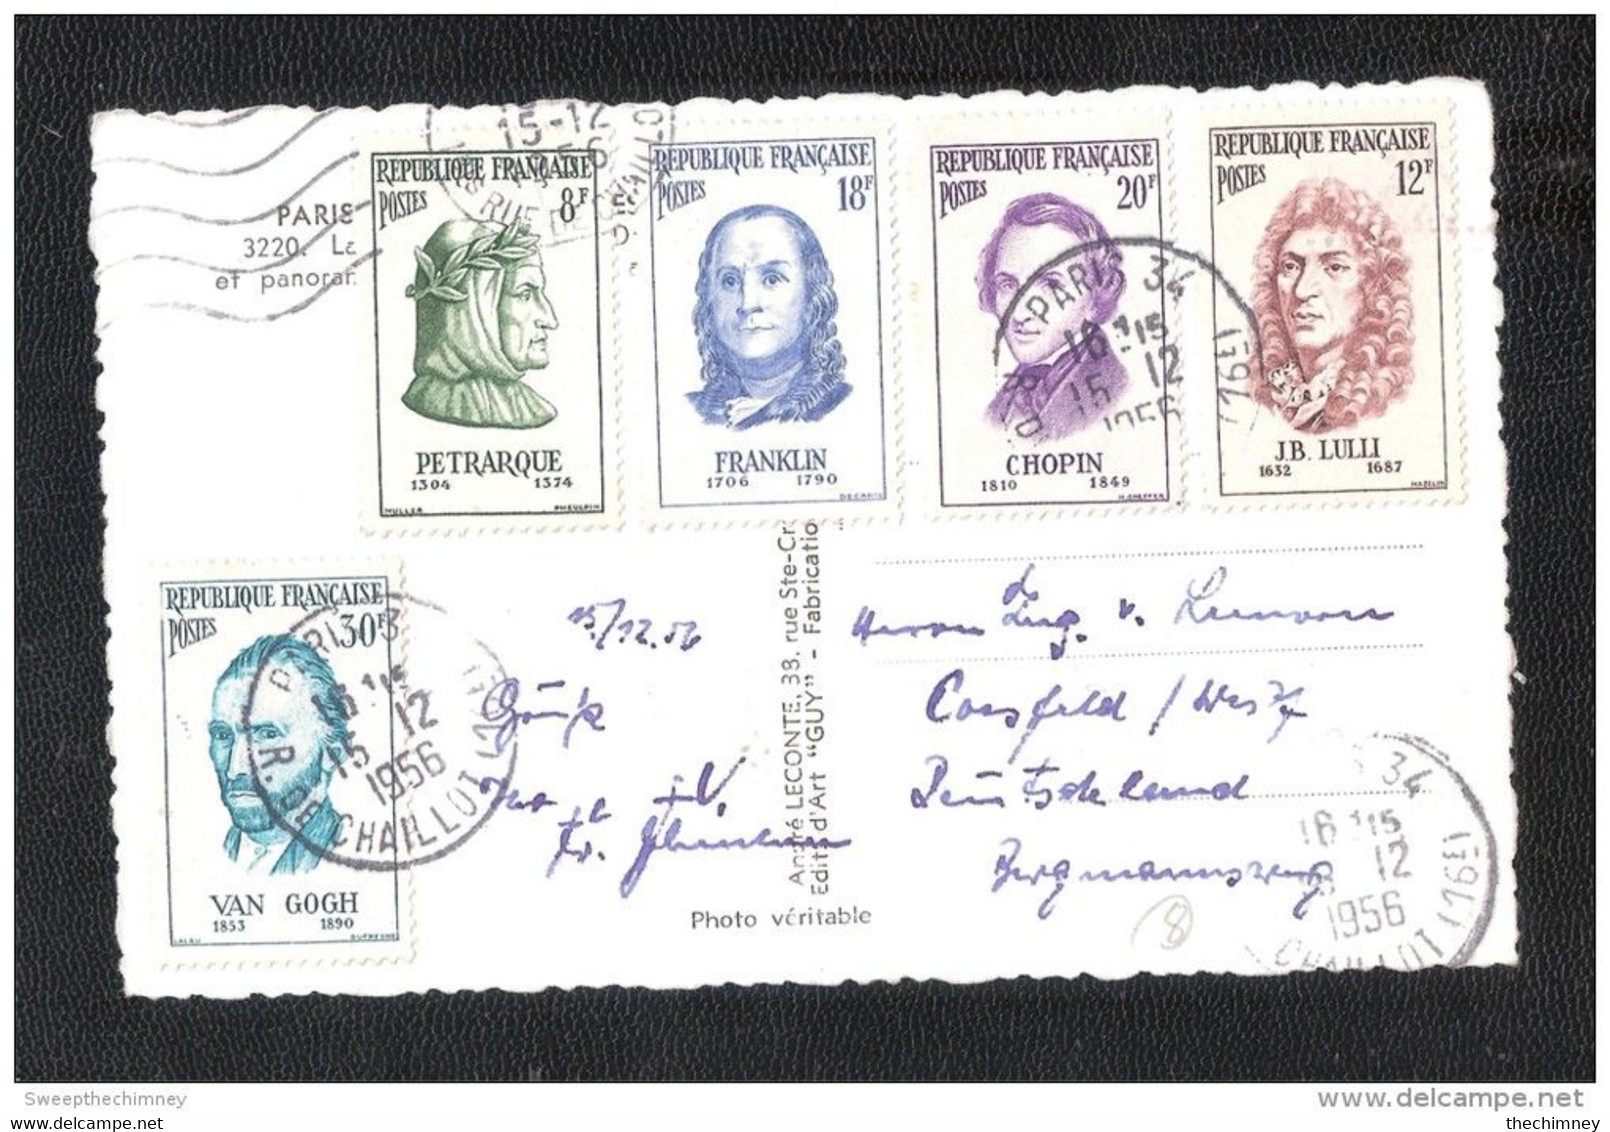 CARTE POSTALE AVEC CINQUE STAMPS IS IT A FDC ? FIRST DAY COVER ?? PEMIER JOUR D'ISSUE ?? - Gebruikt